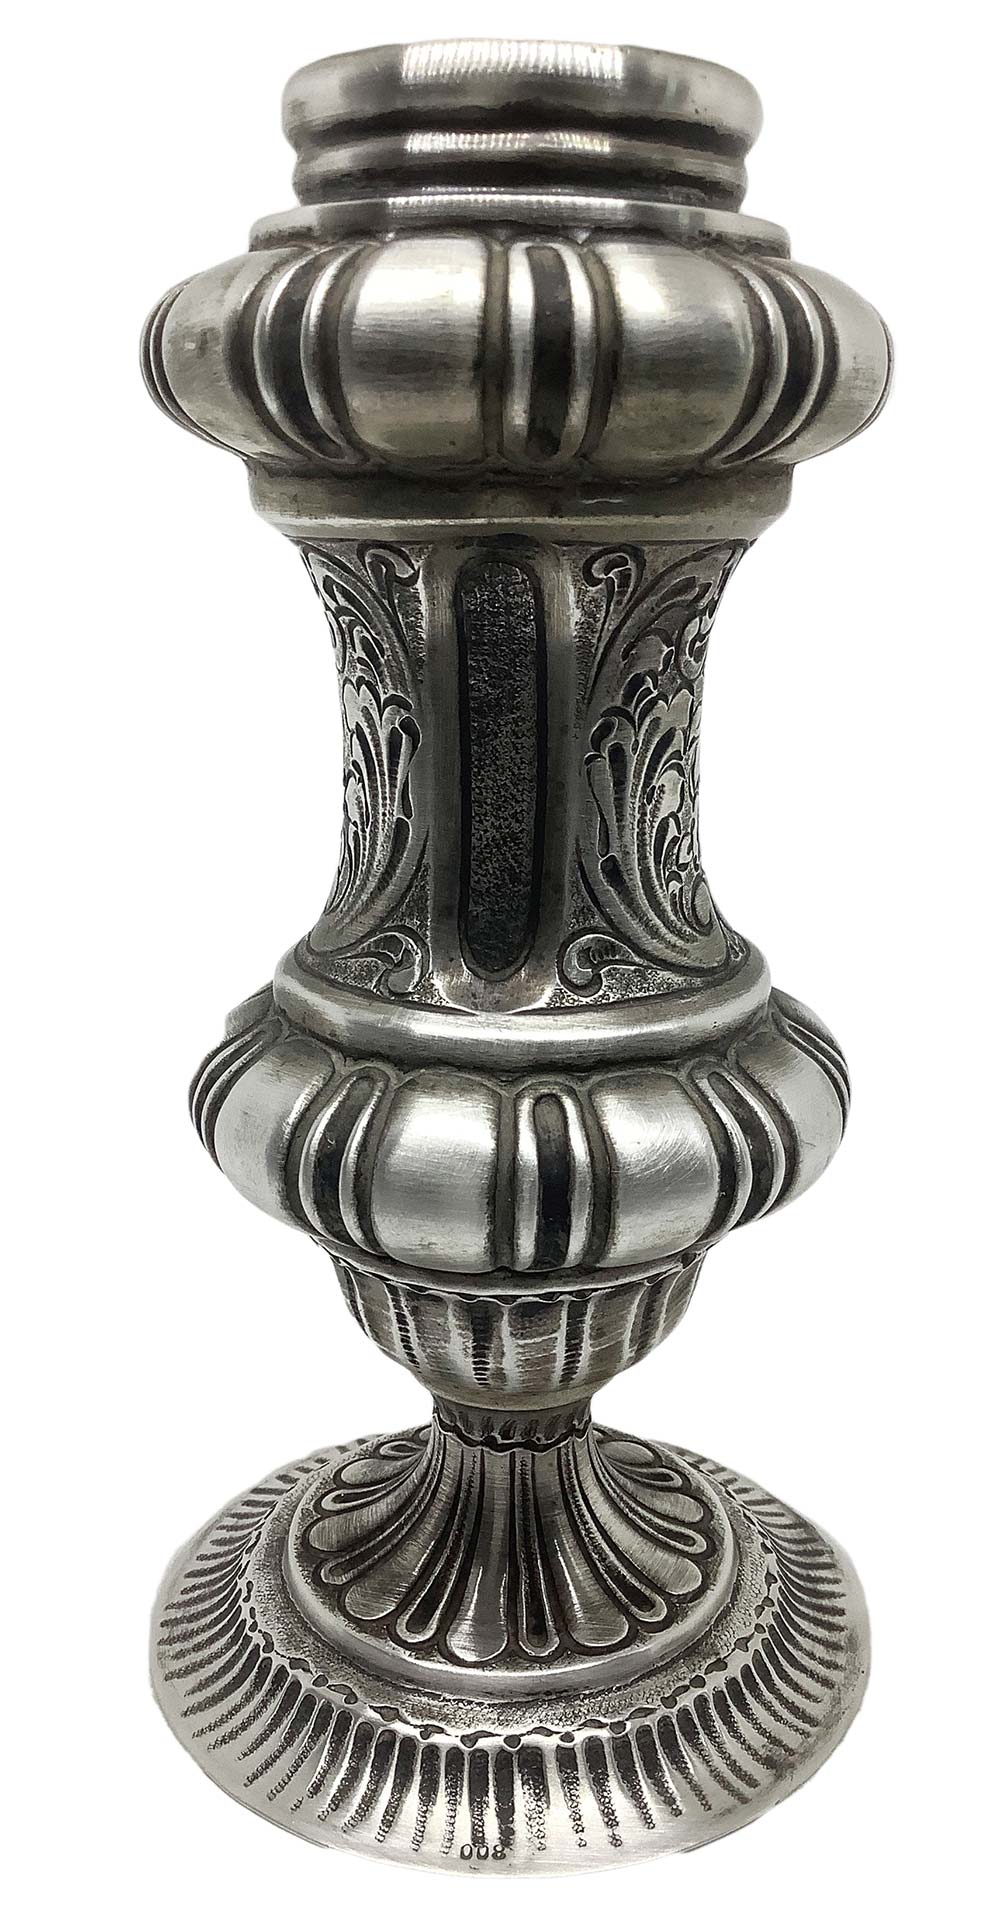 Small silver vase, late 19th century. Punched "Silver 800". H cm 16 with base, diameter cm 2,5 - Image 2 of 5